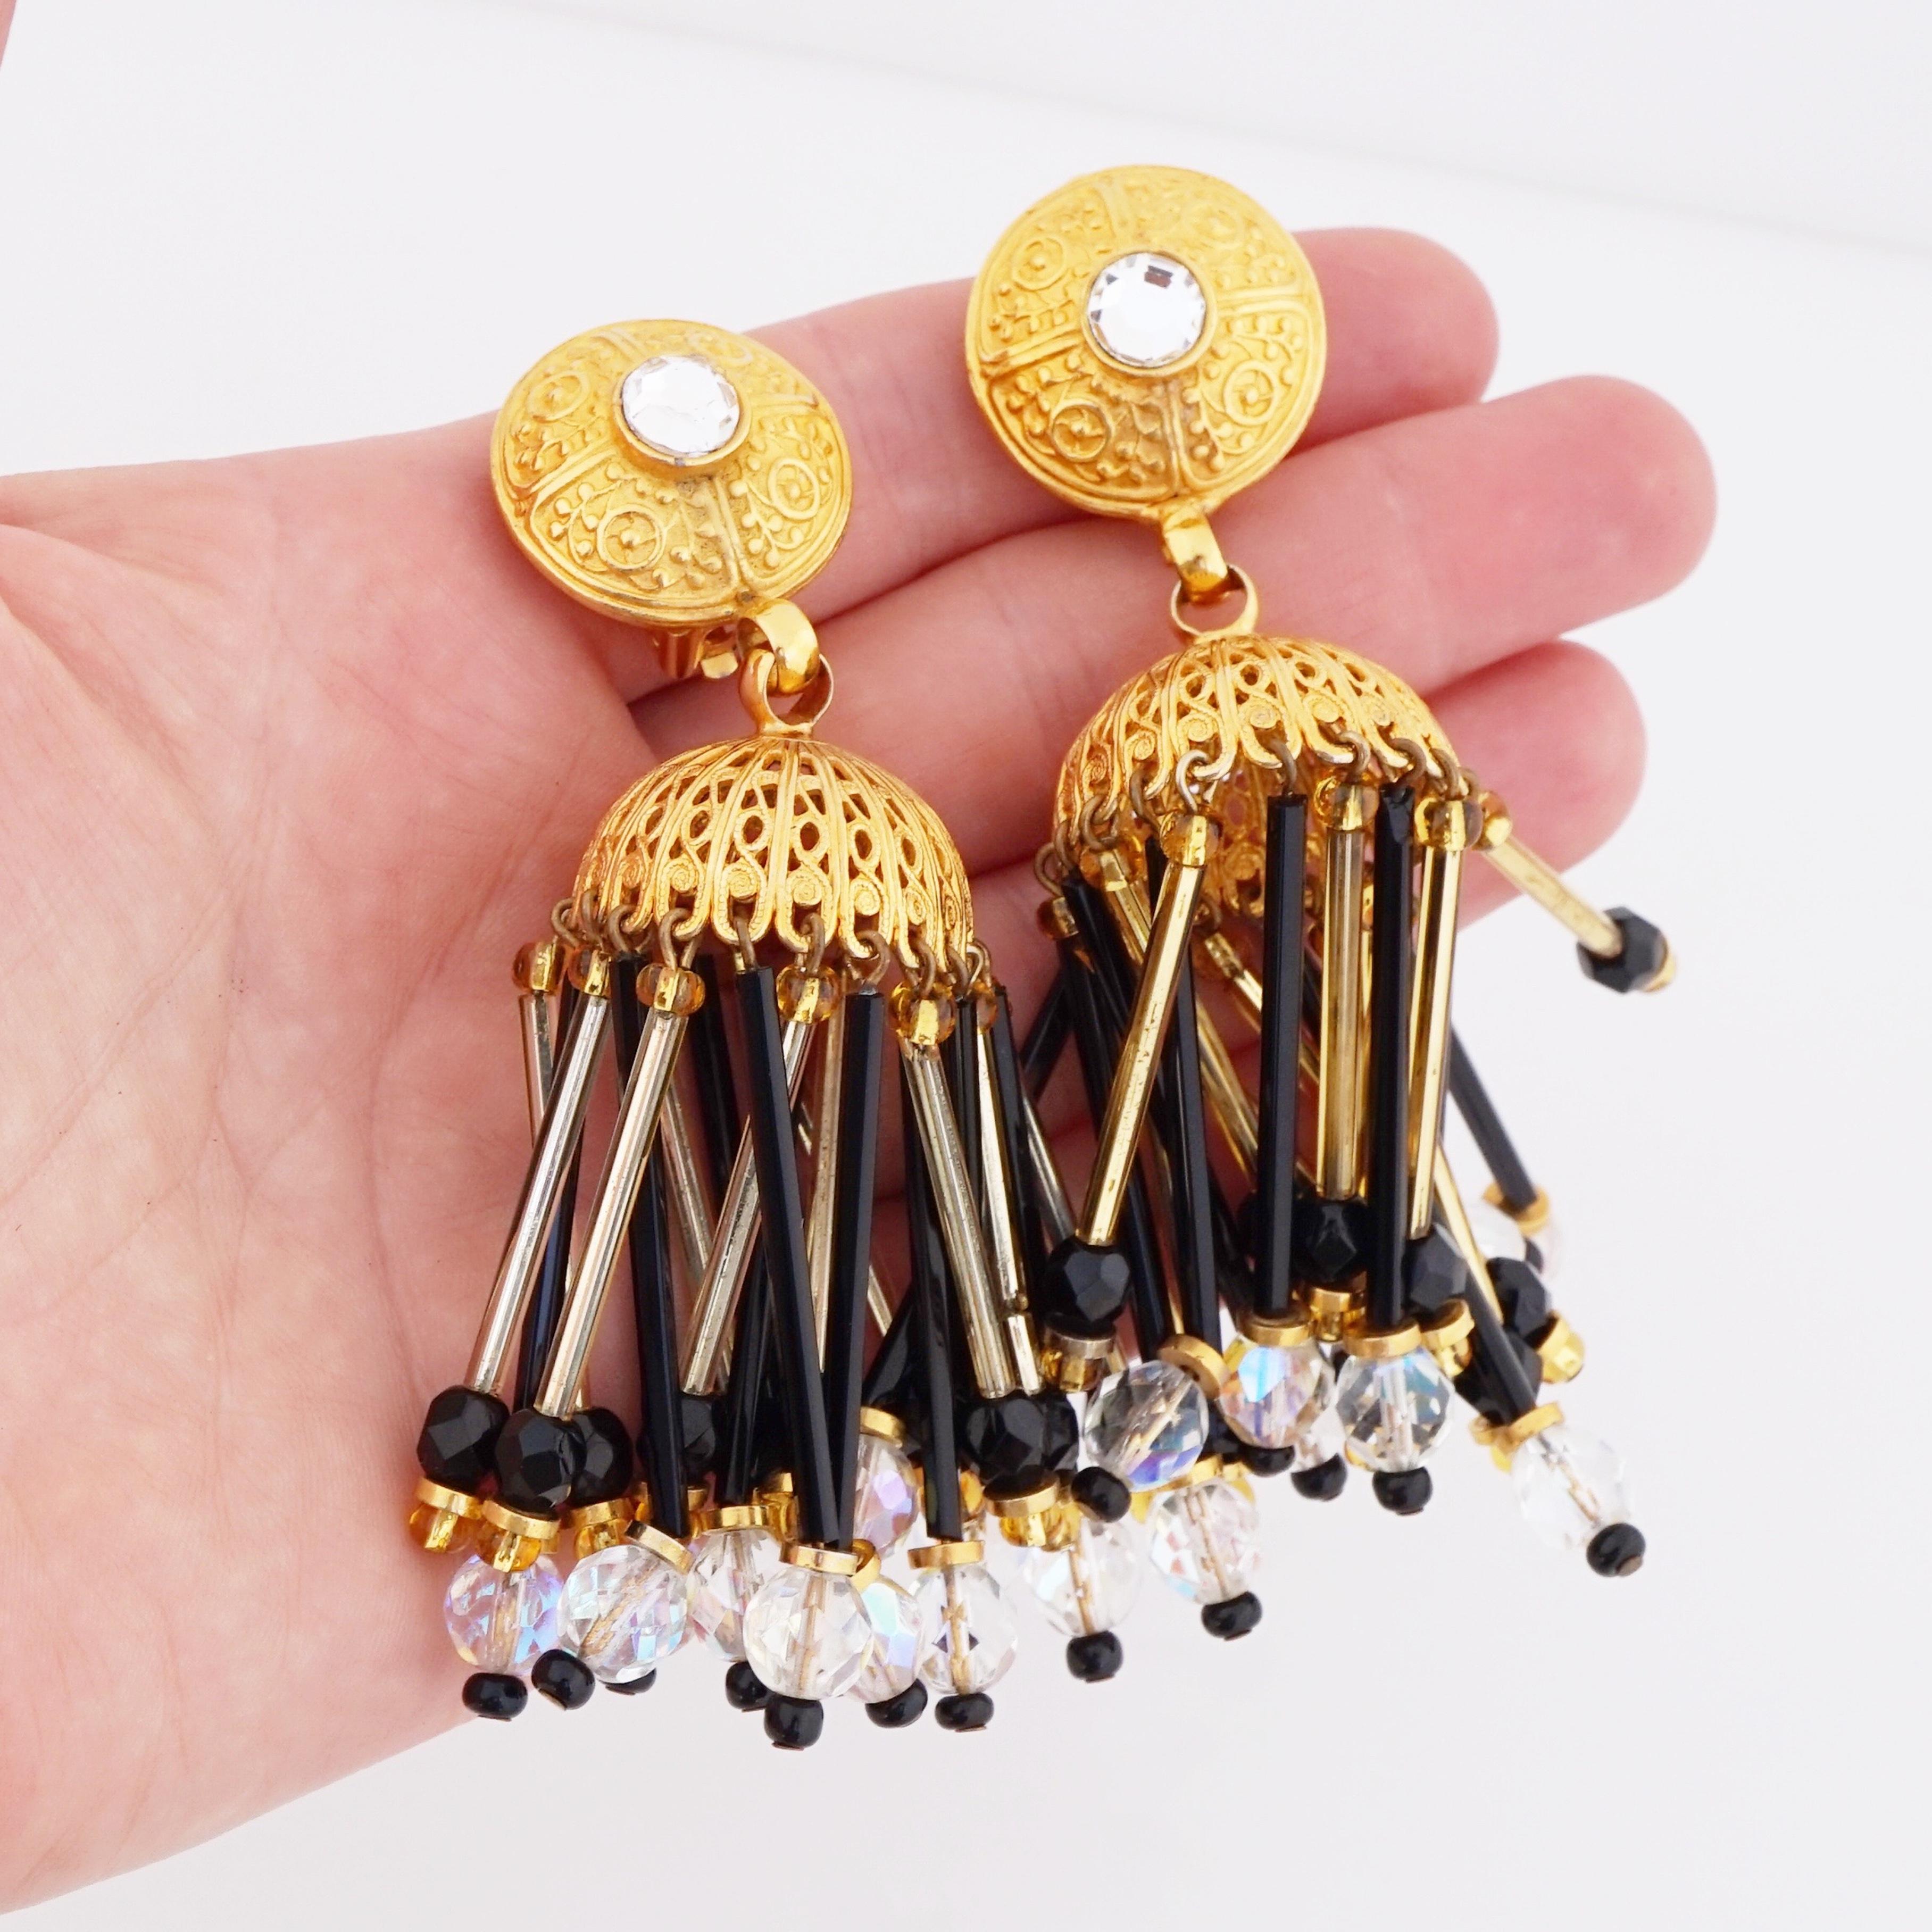 Modern Chandelier Earrings With Black & Aurora Borealis Crystals By Les Bernard, 1980s For Sale